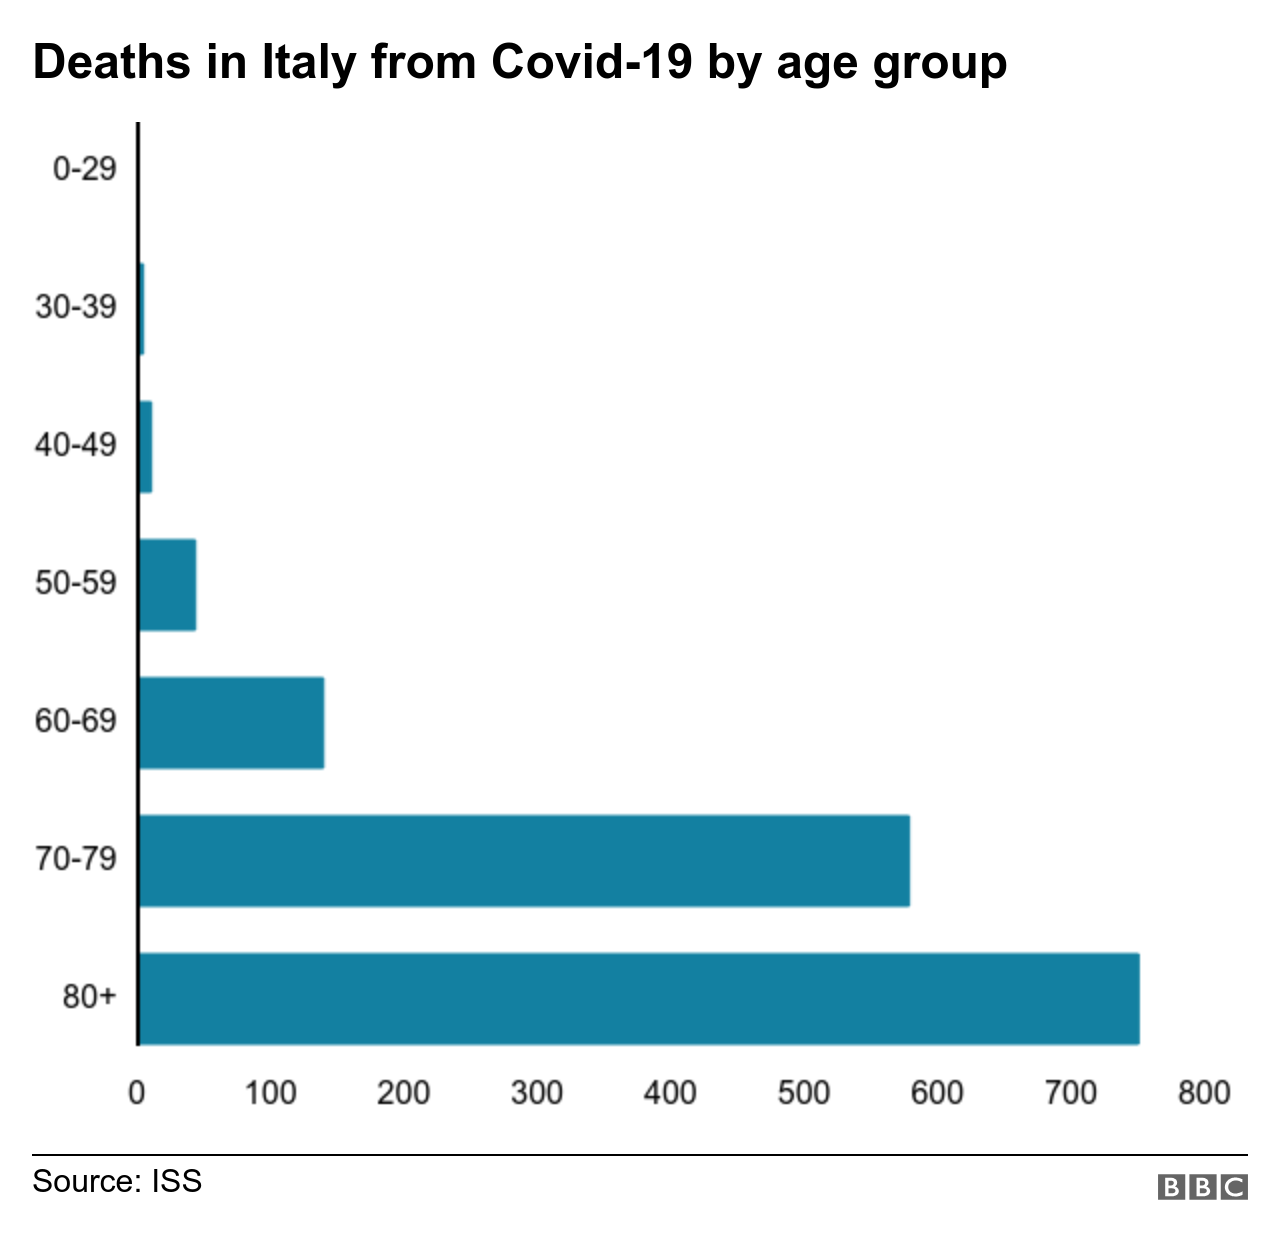 Graphic showing the number of coronavirus deaths in Italy by age group